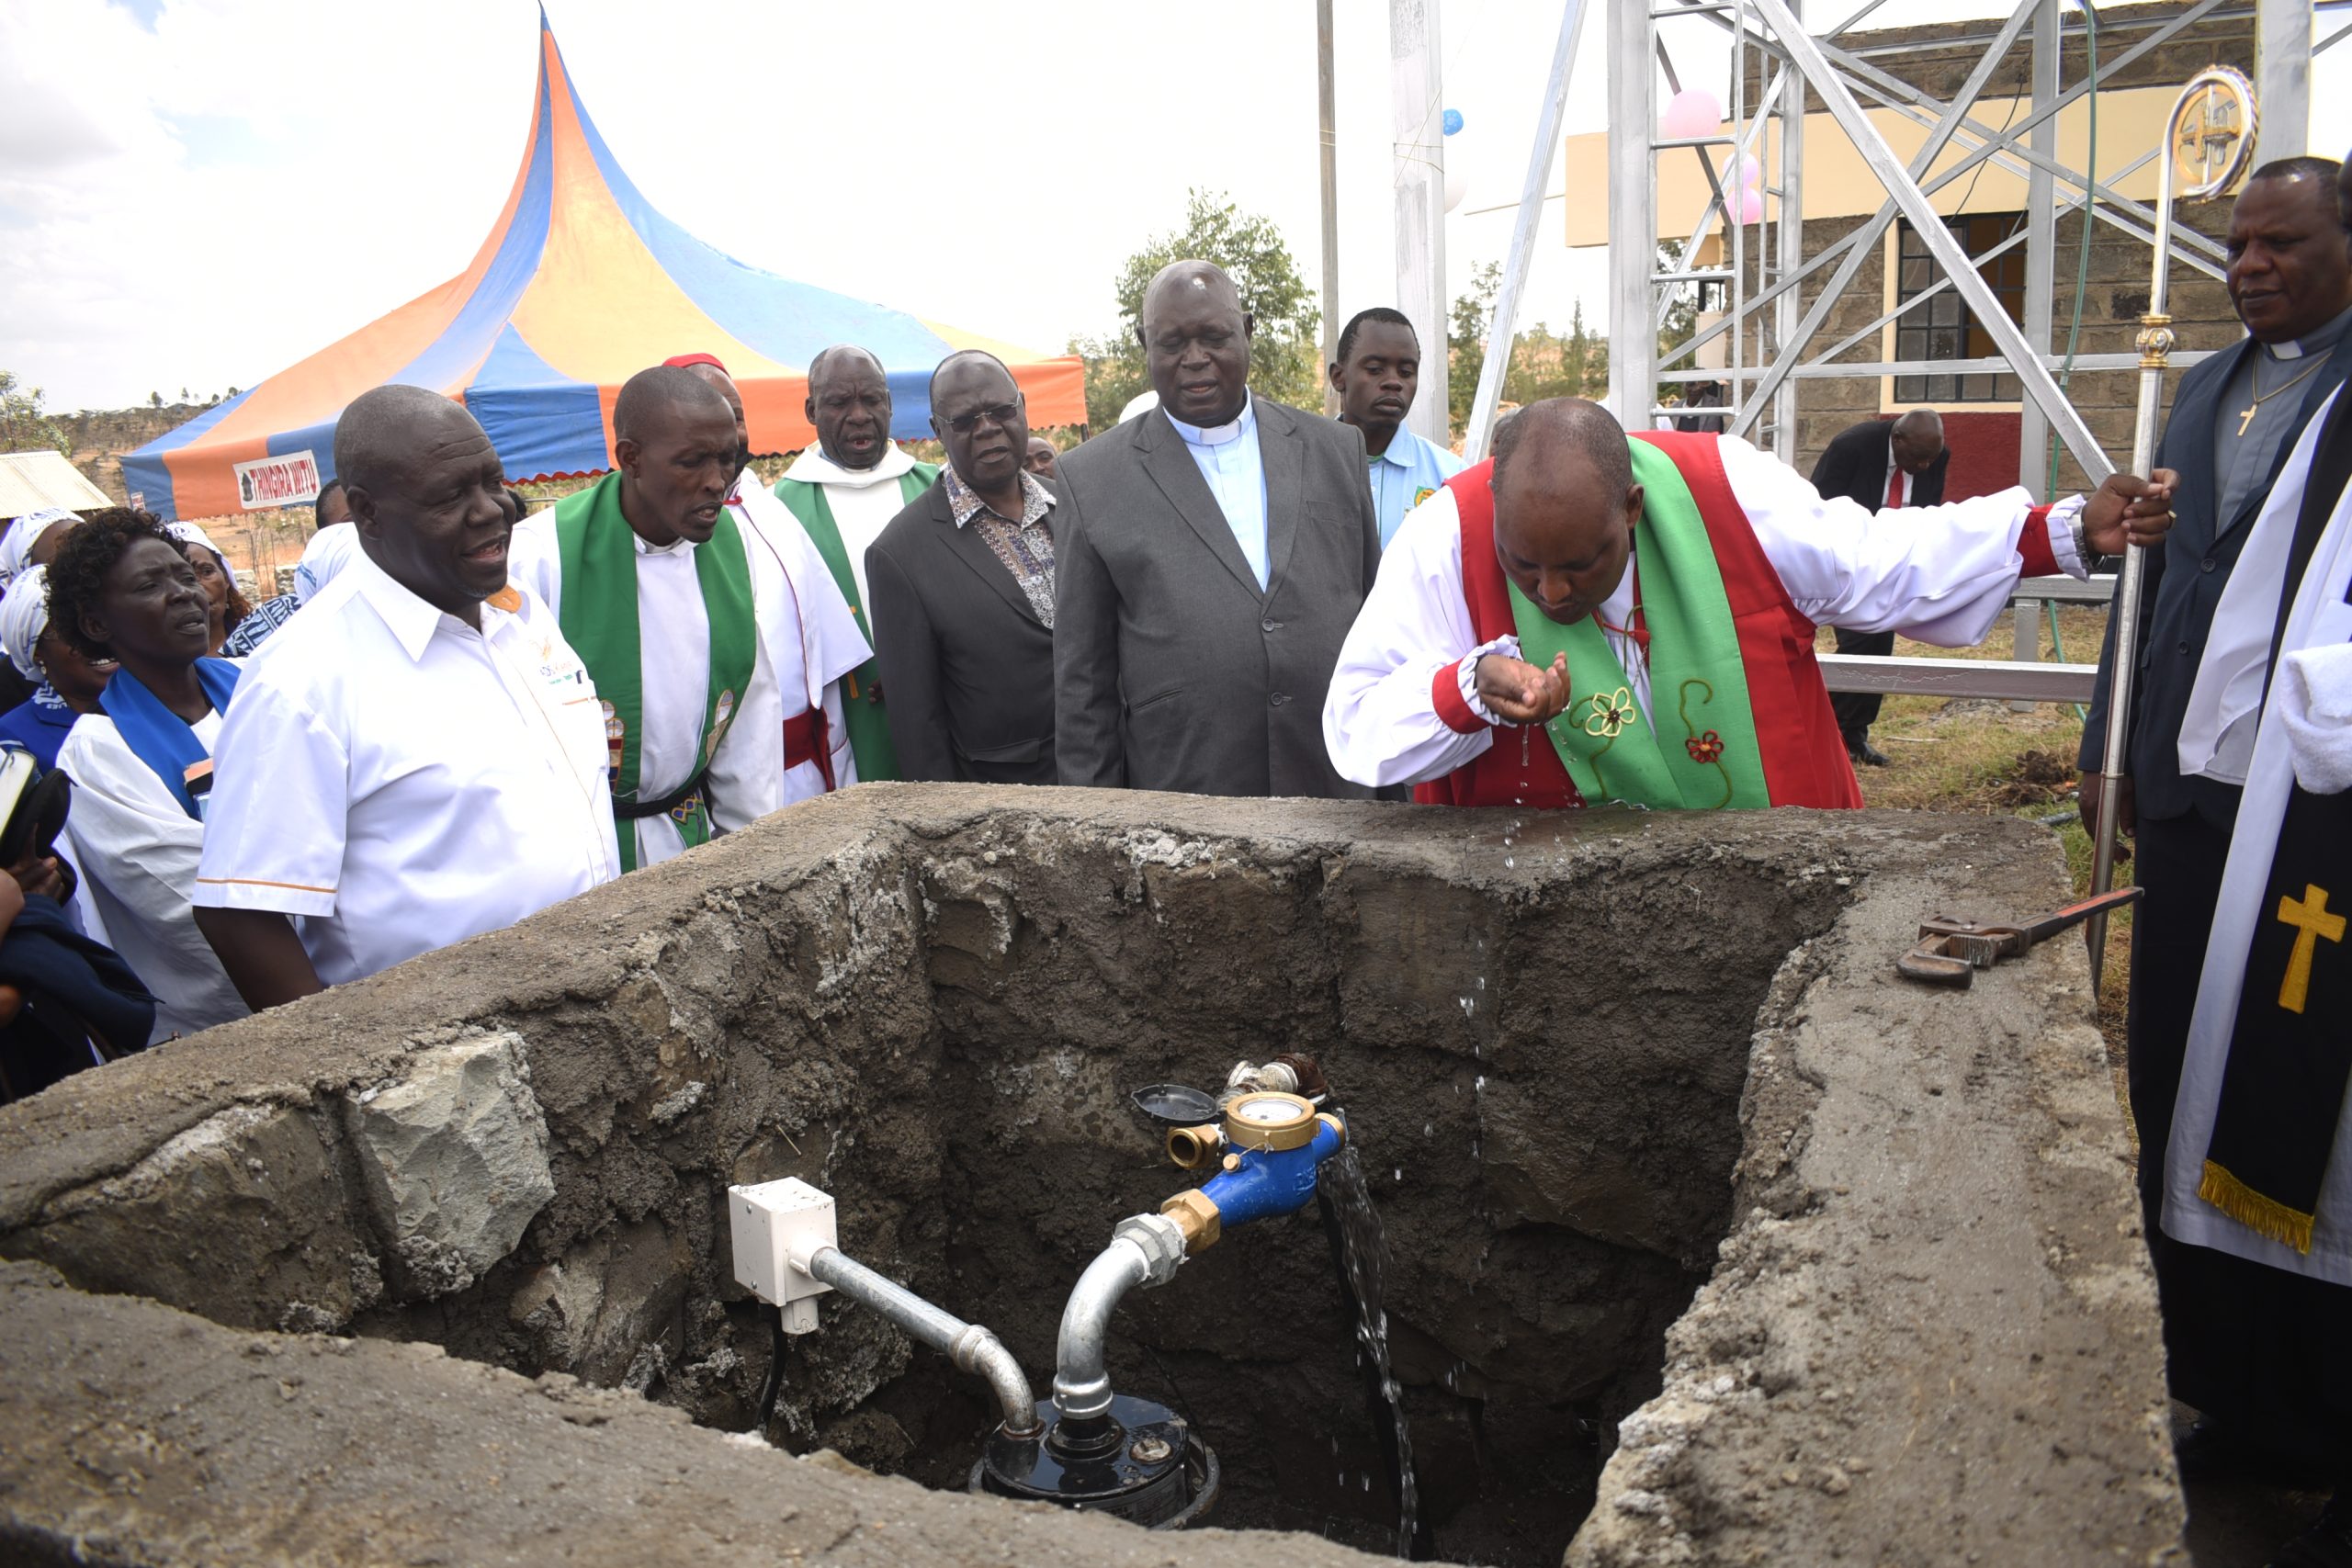 Increasing access to clean water: Rehabilitation of the ACK St. Paul’s Osotua Borehole